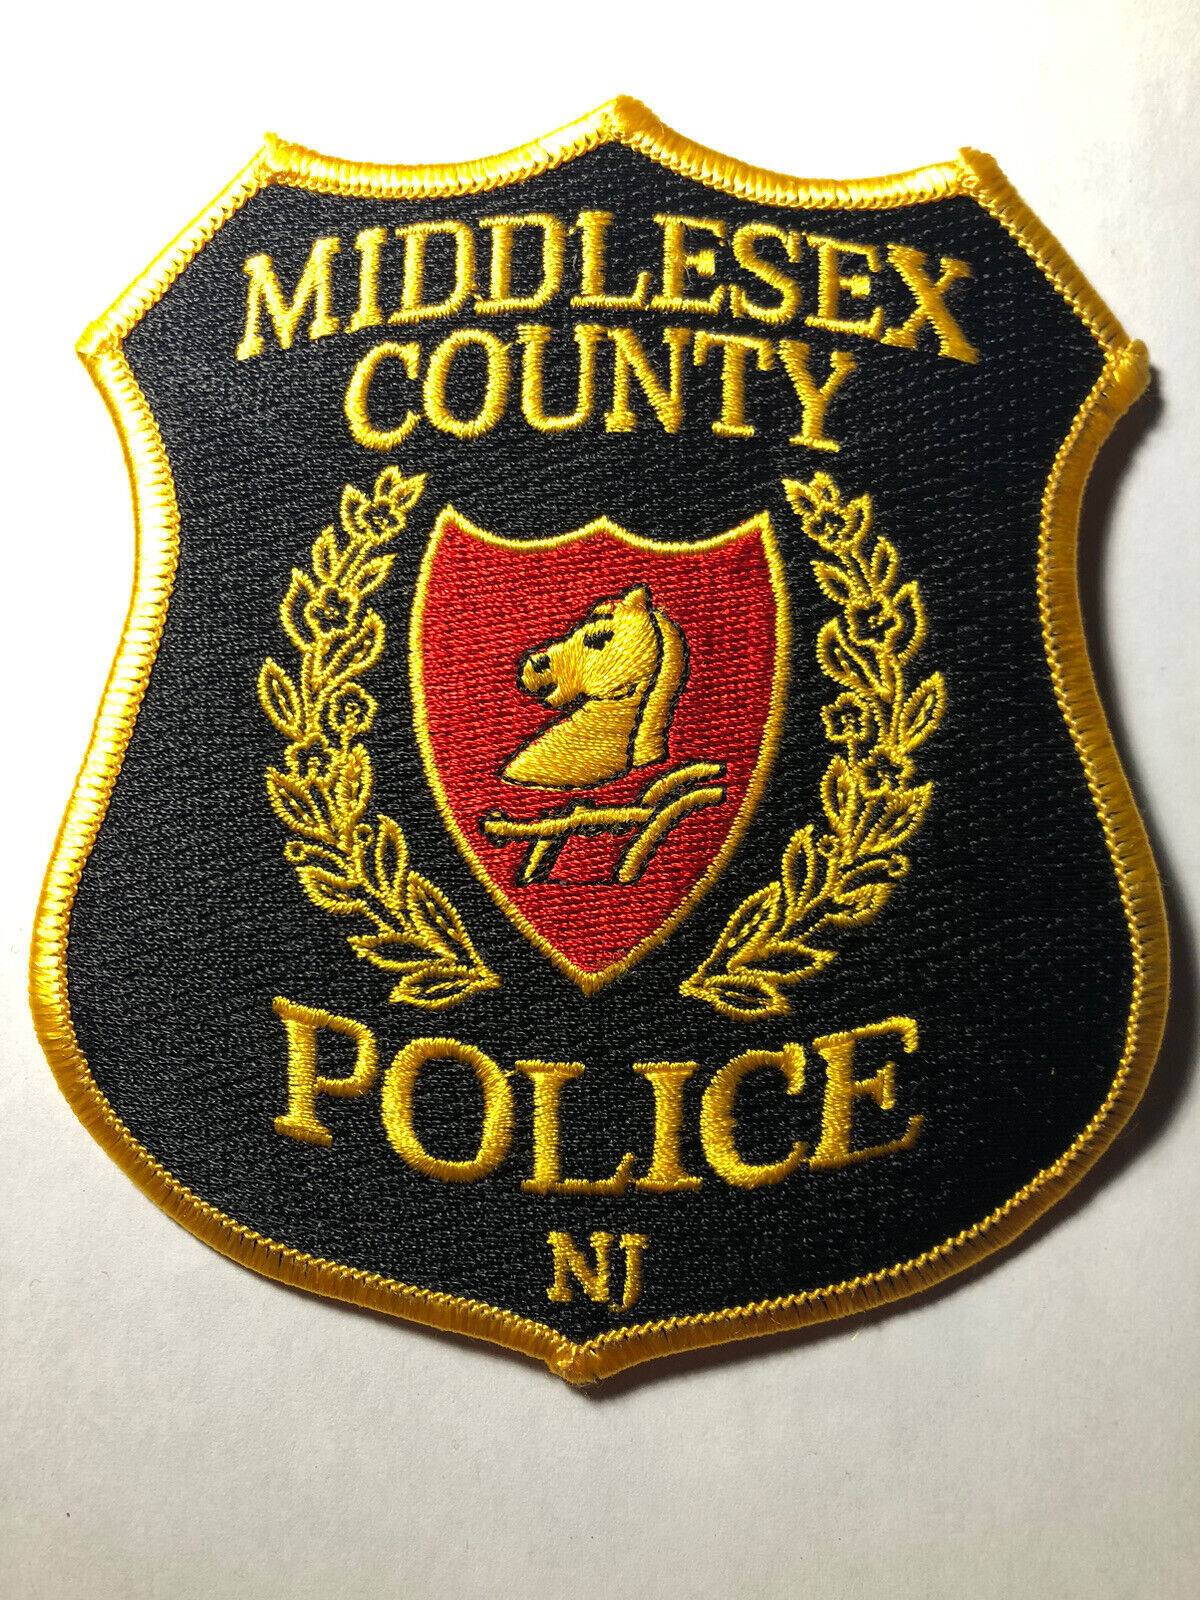 Middlesex County New Jersey Police Patch